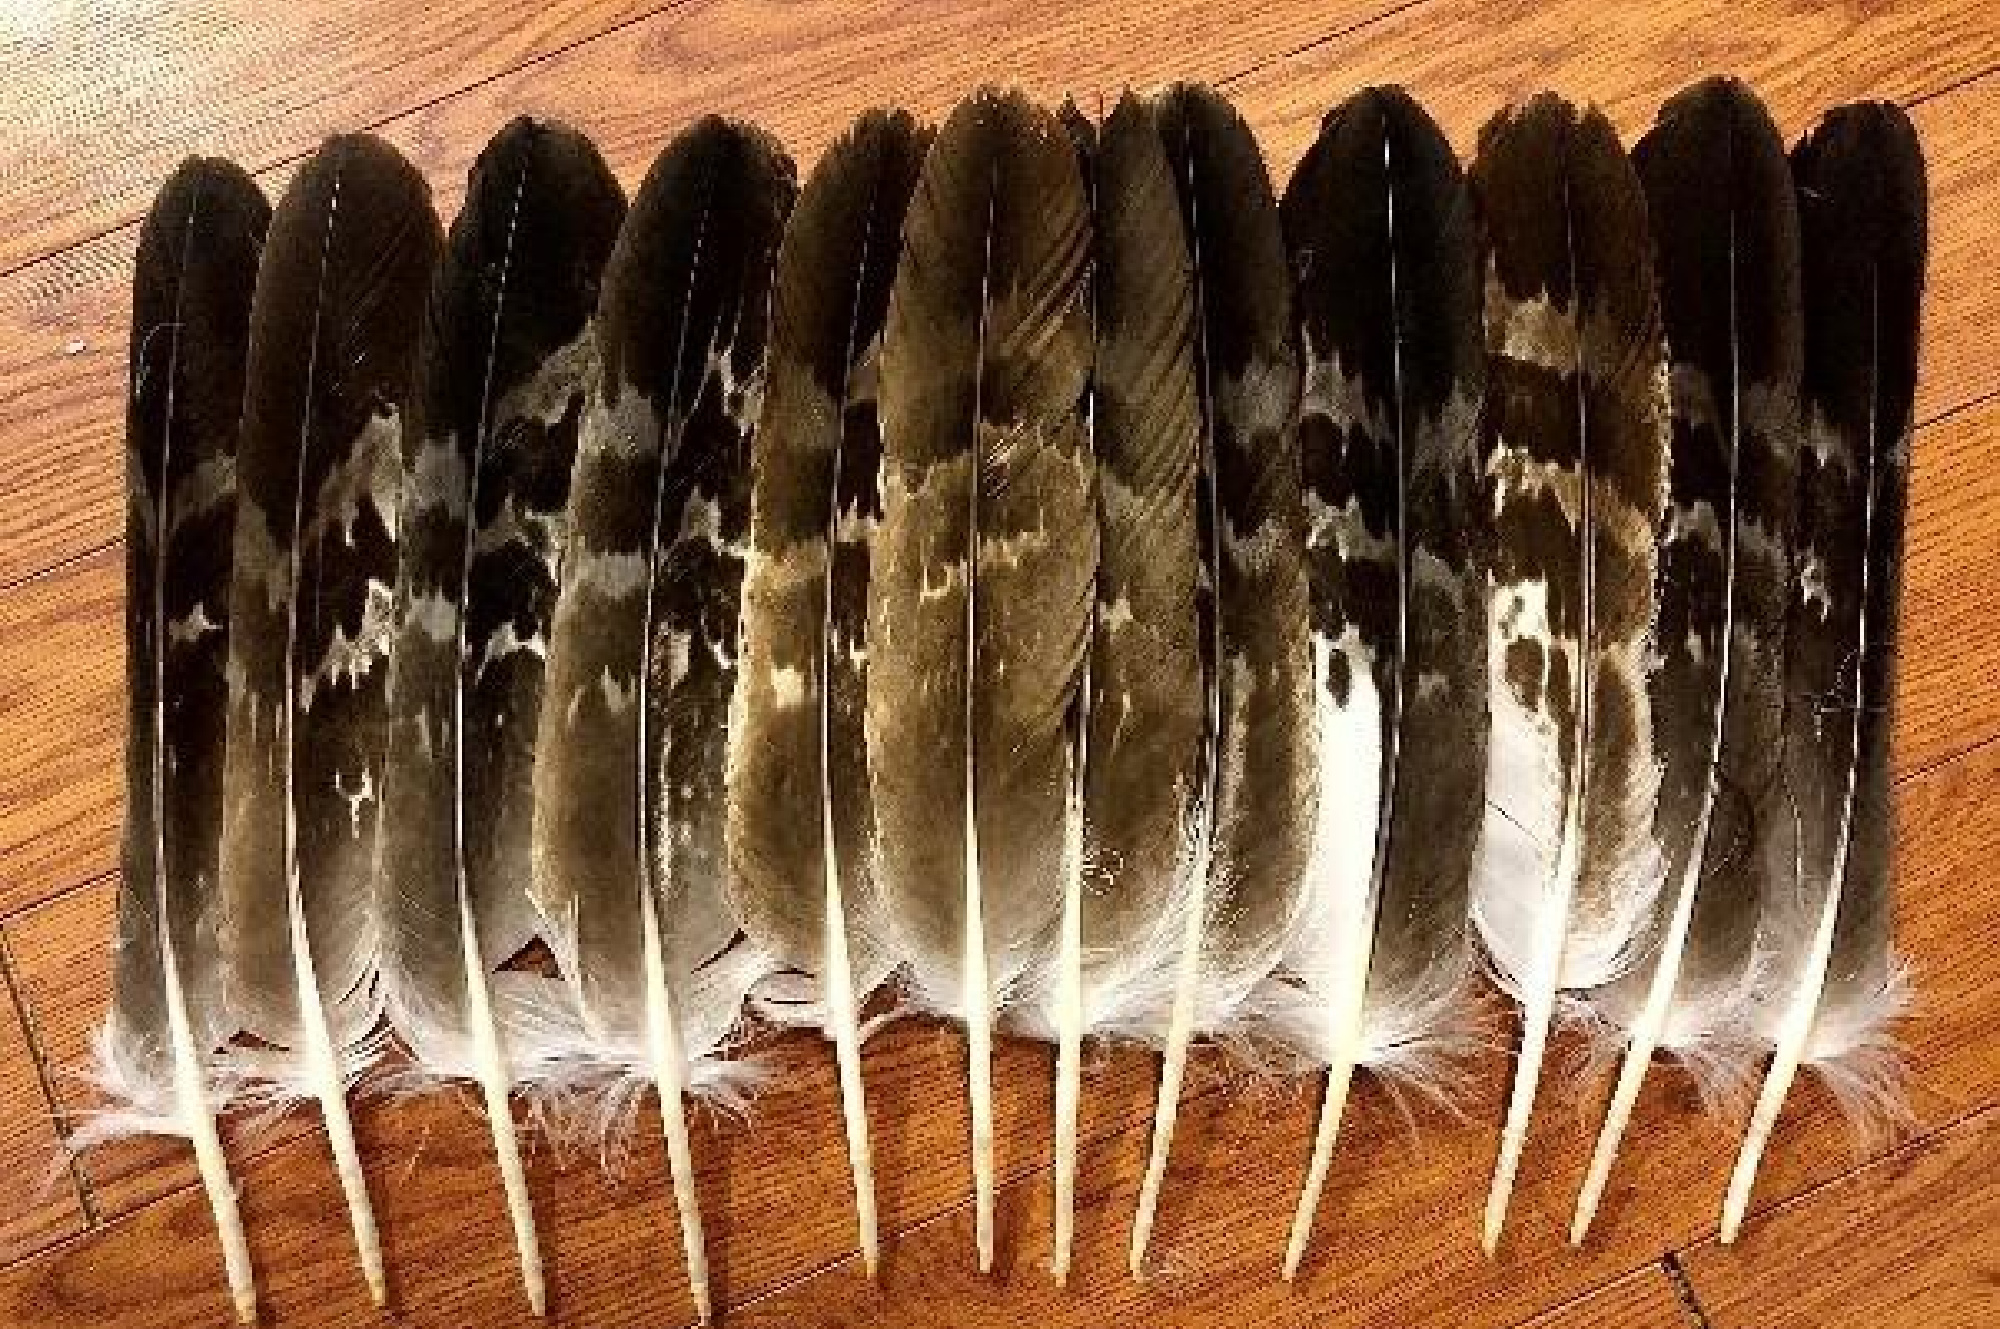 Eagle feathers lined up on a table.